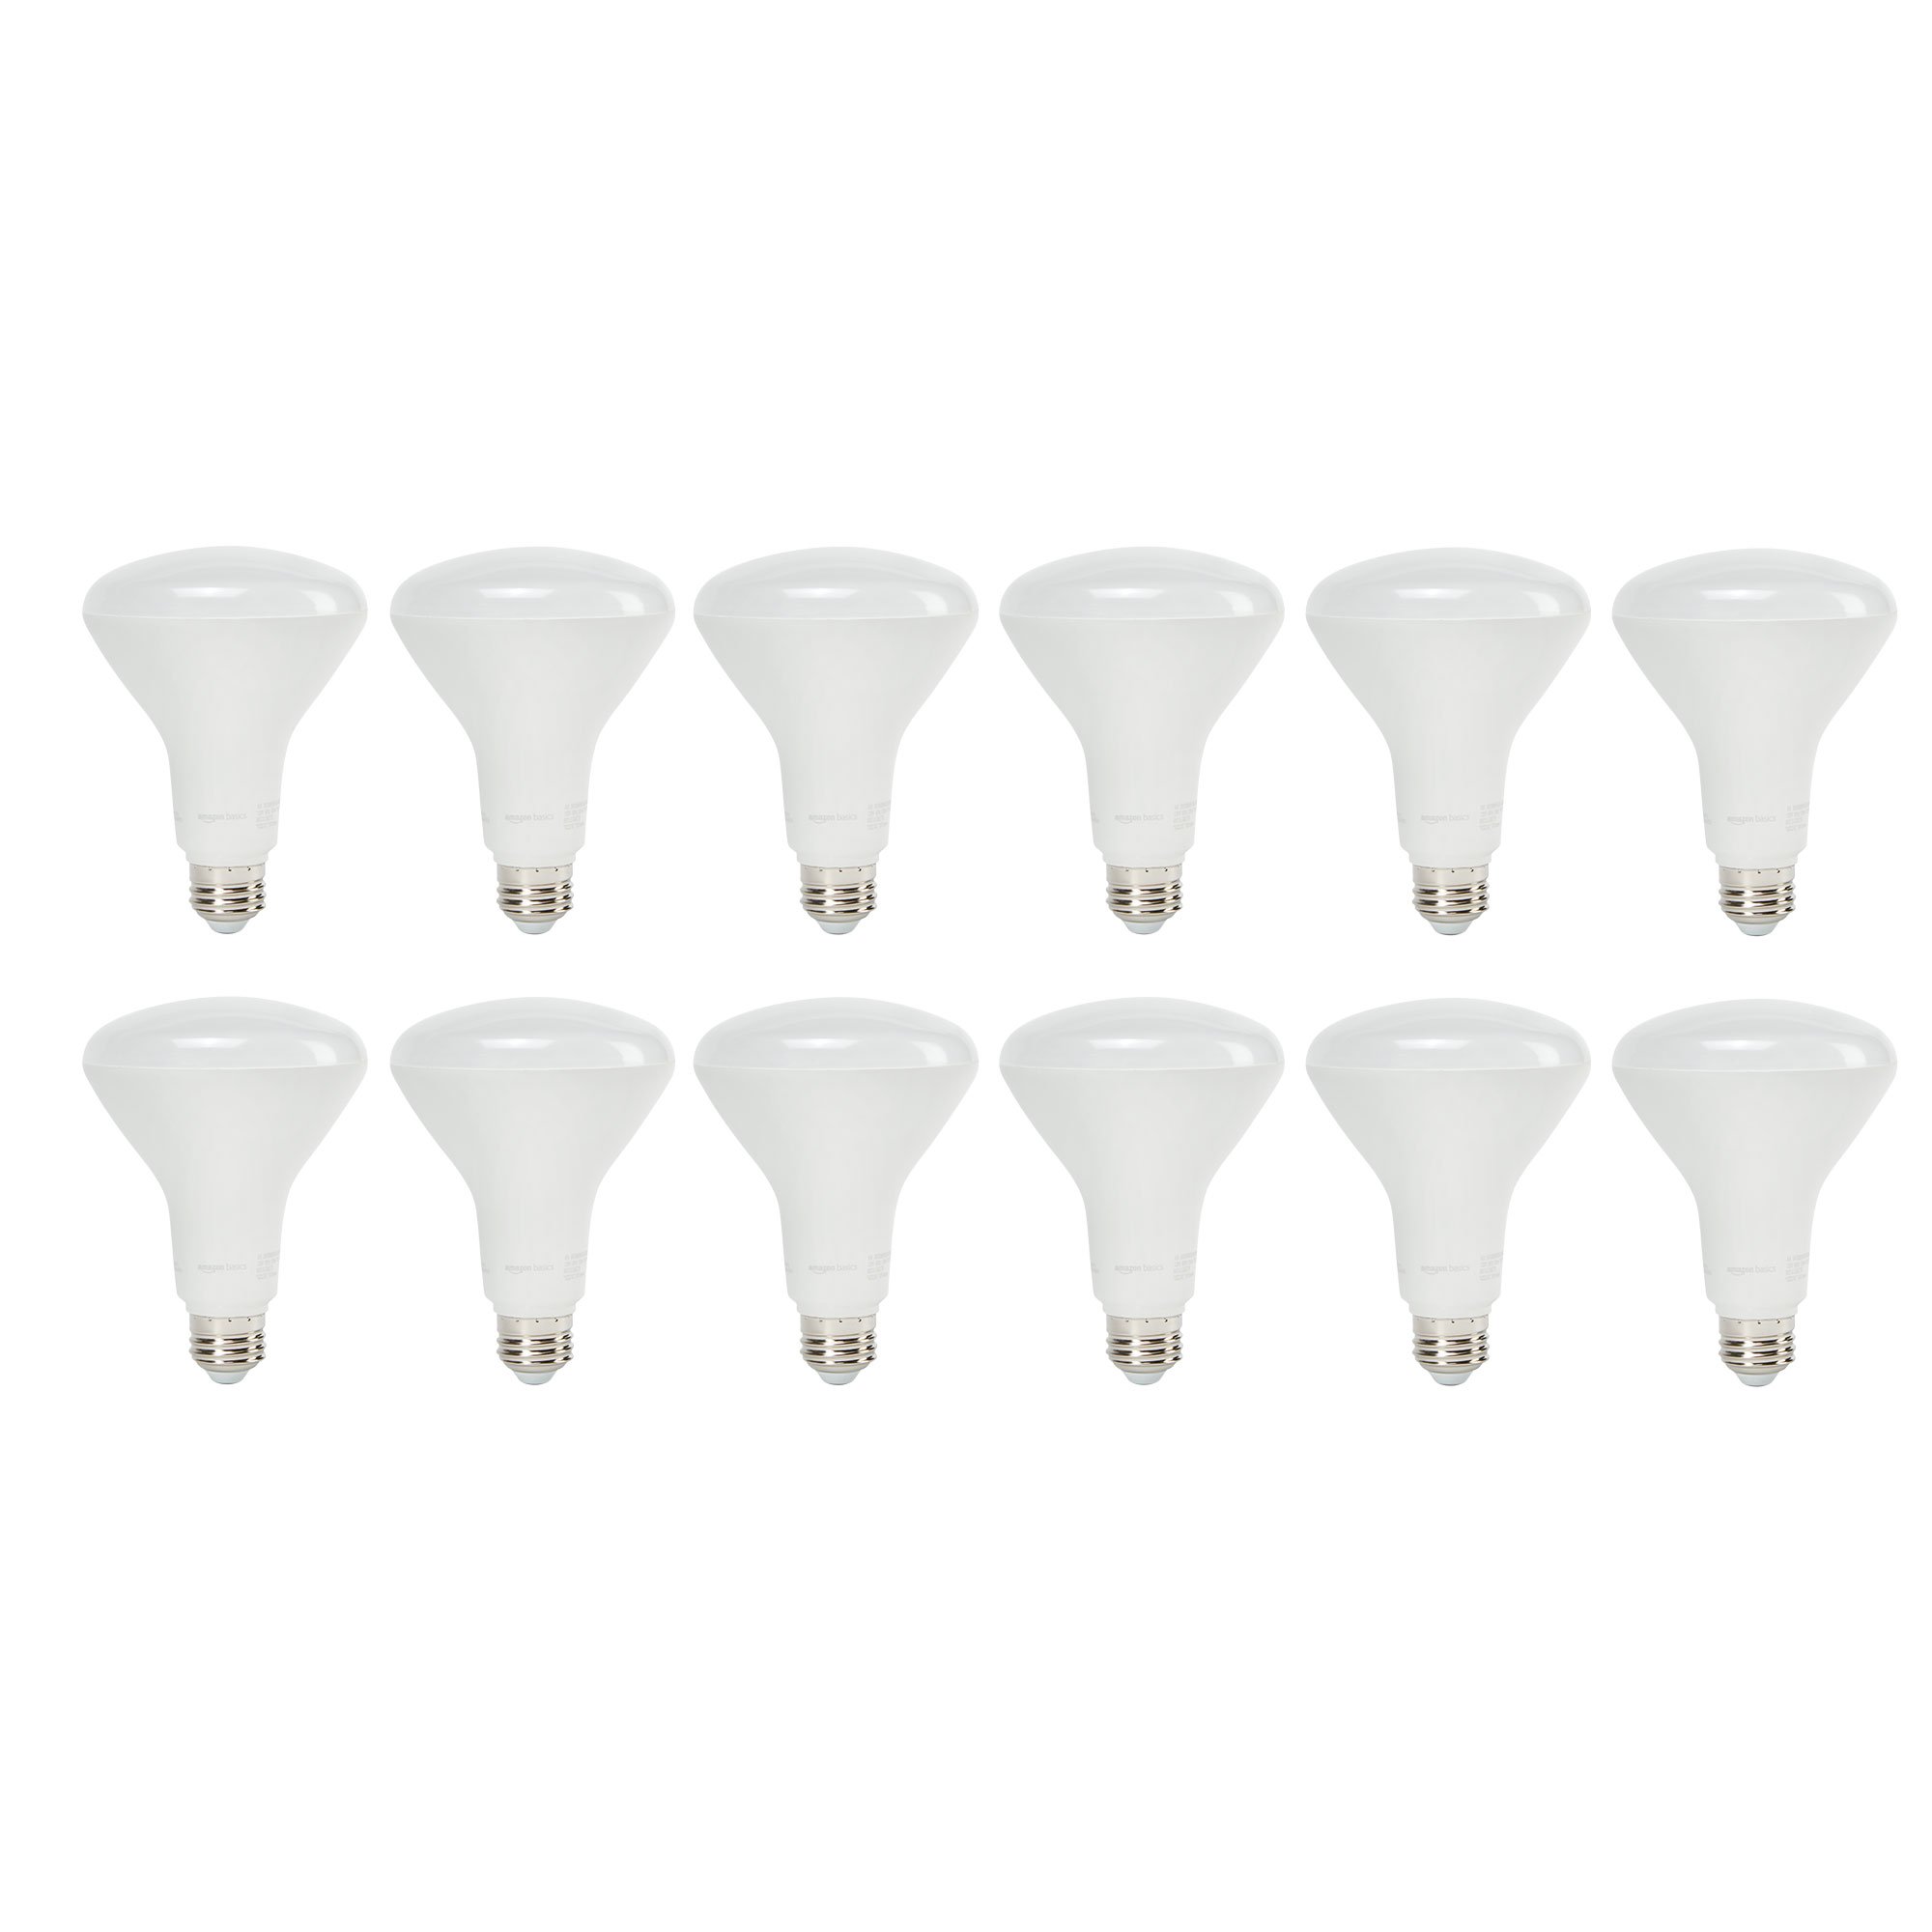 Dimmable Recessed LED Bulbs - 12 Pack